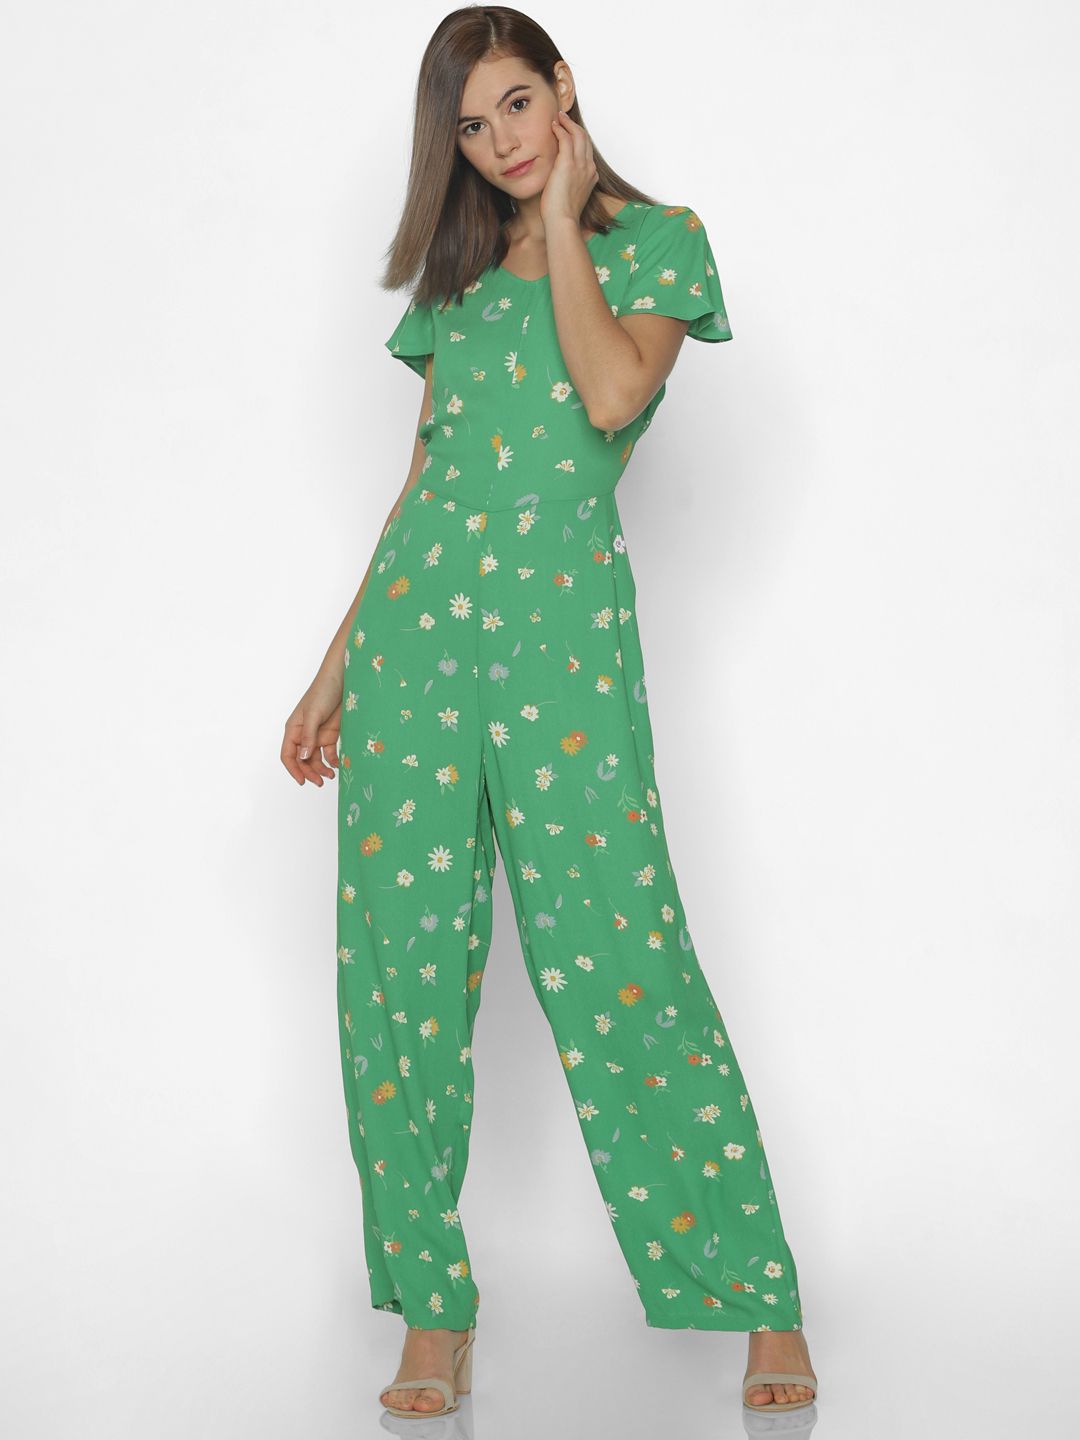 ONLY Women Green Printed Basic Jumpsuite Price in India